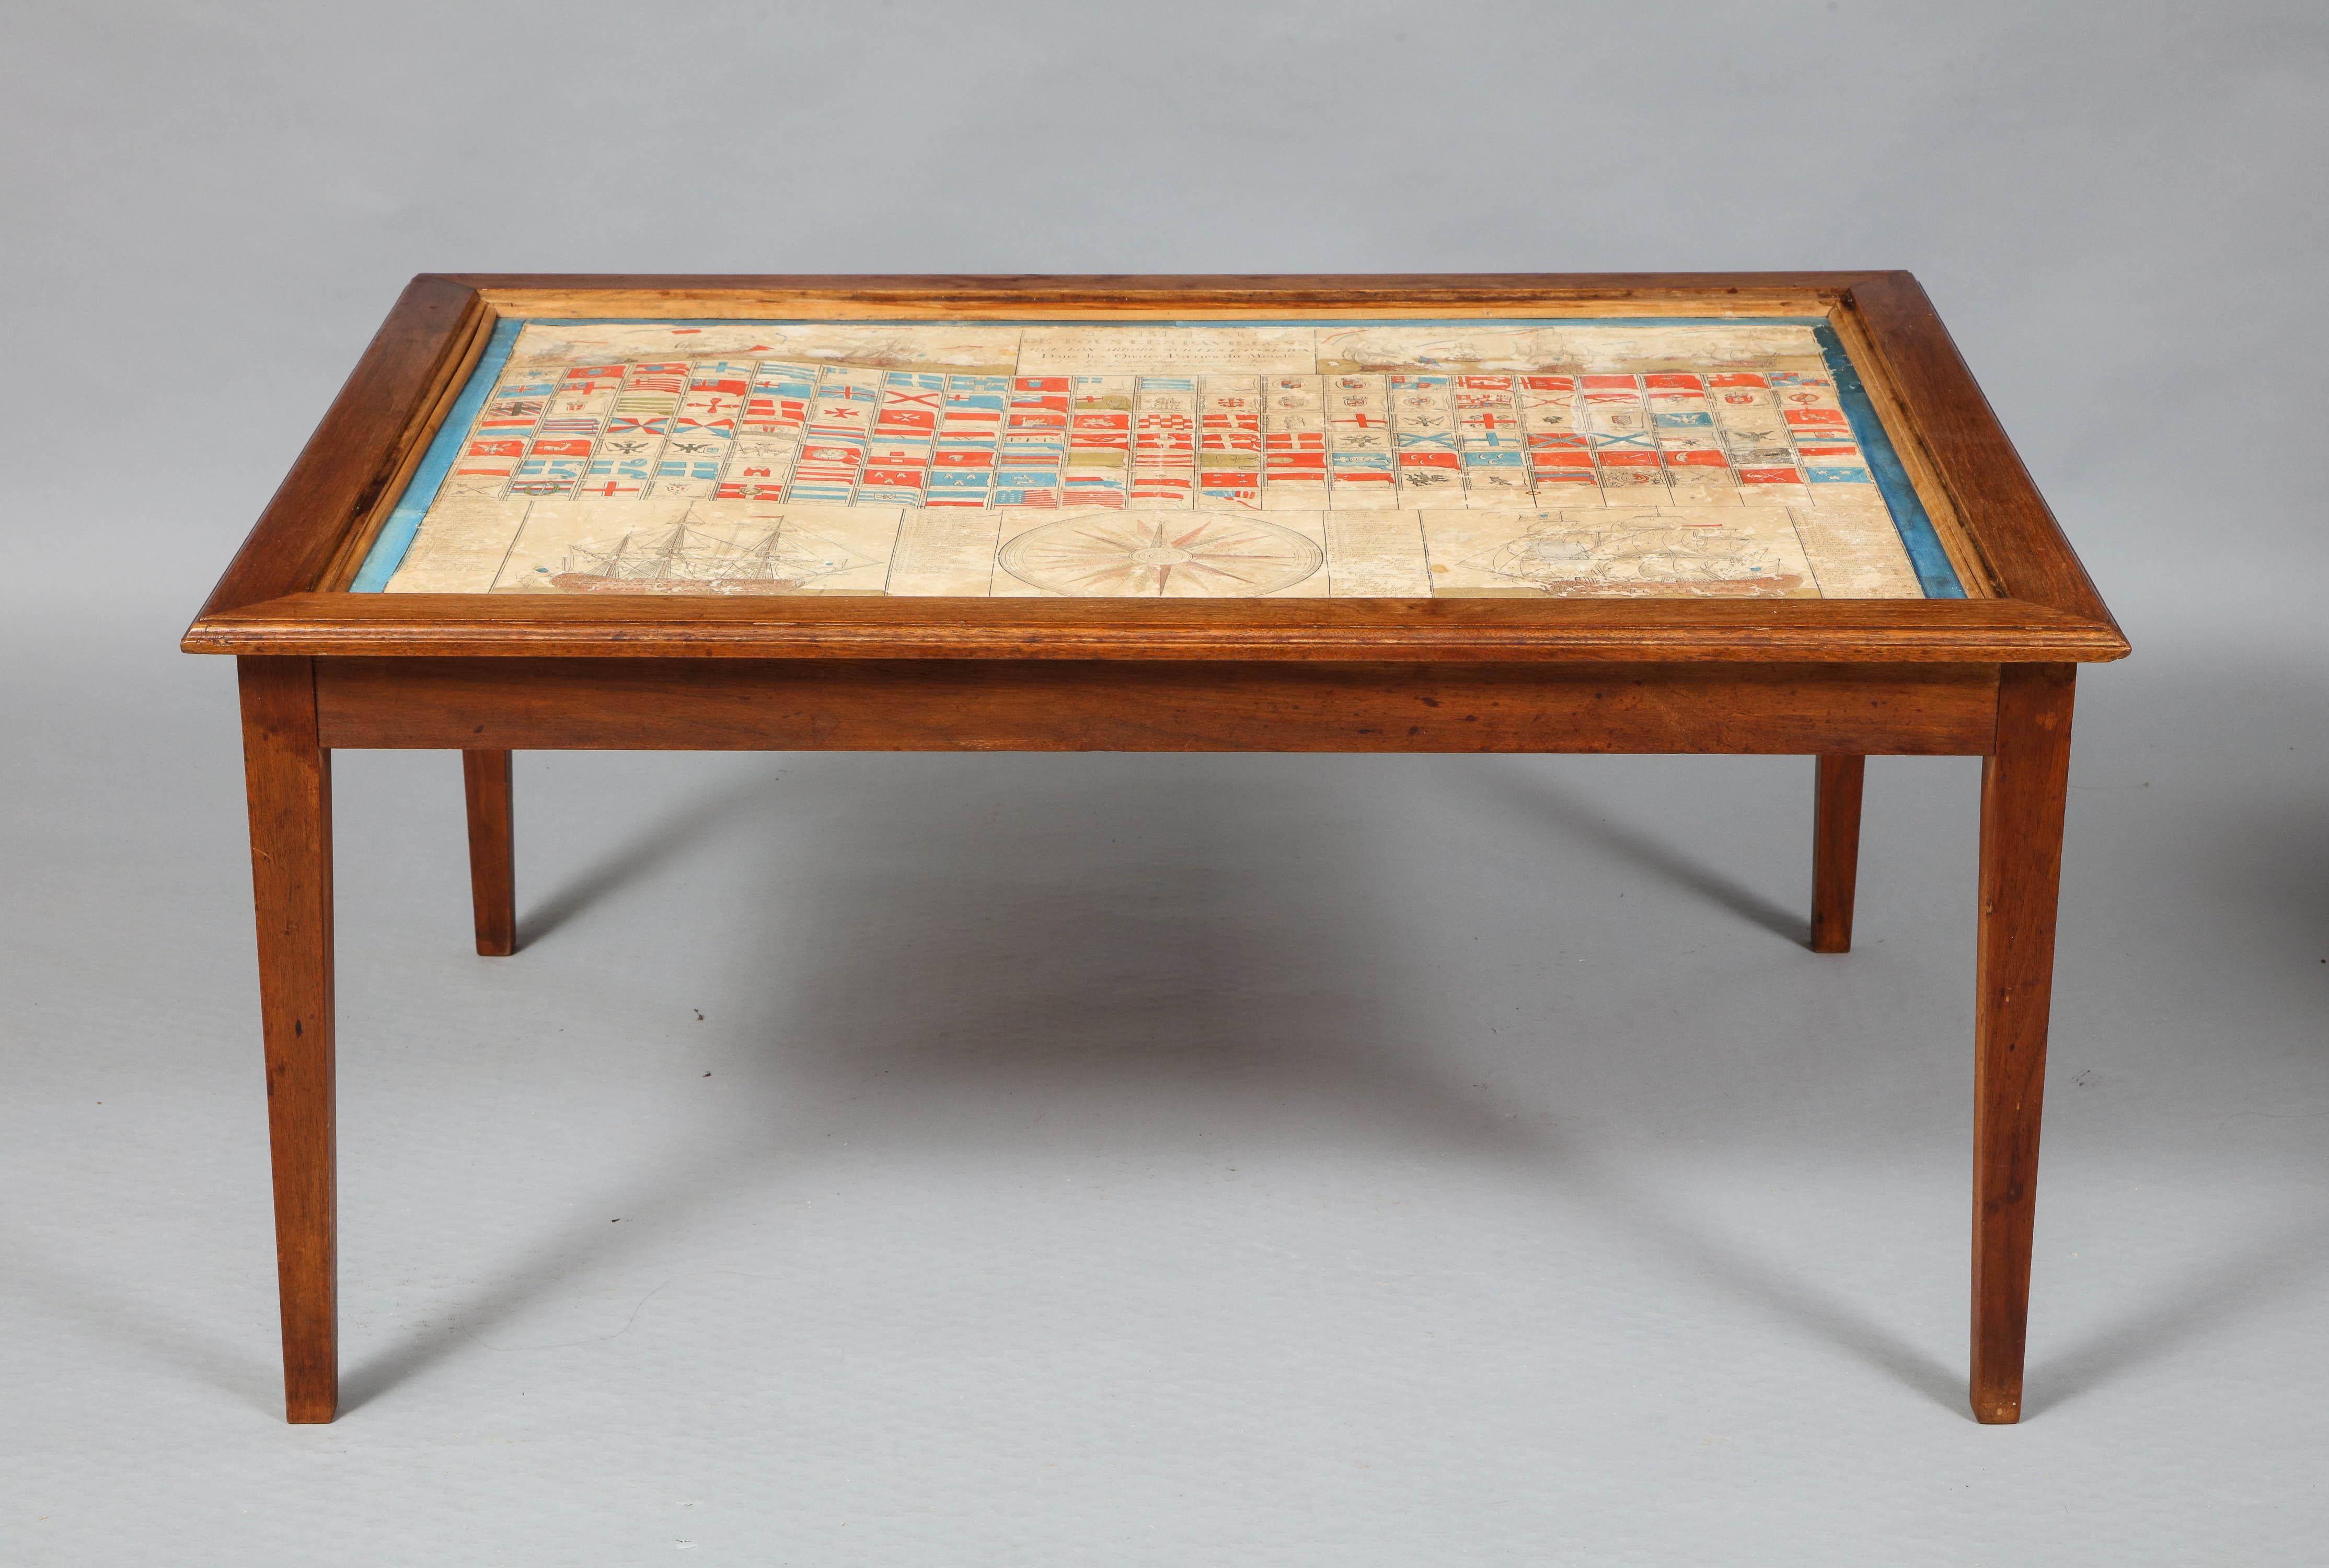 Unusual midcentury walnut coffee table incorporating a hand colored 18th century French engraved chart of naval flags, dated 1782. The top of mitered walnut with engraving under glass top, standing on square tapered legs in a pale walnut. The